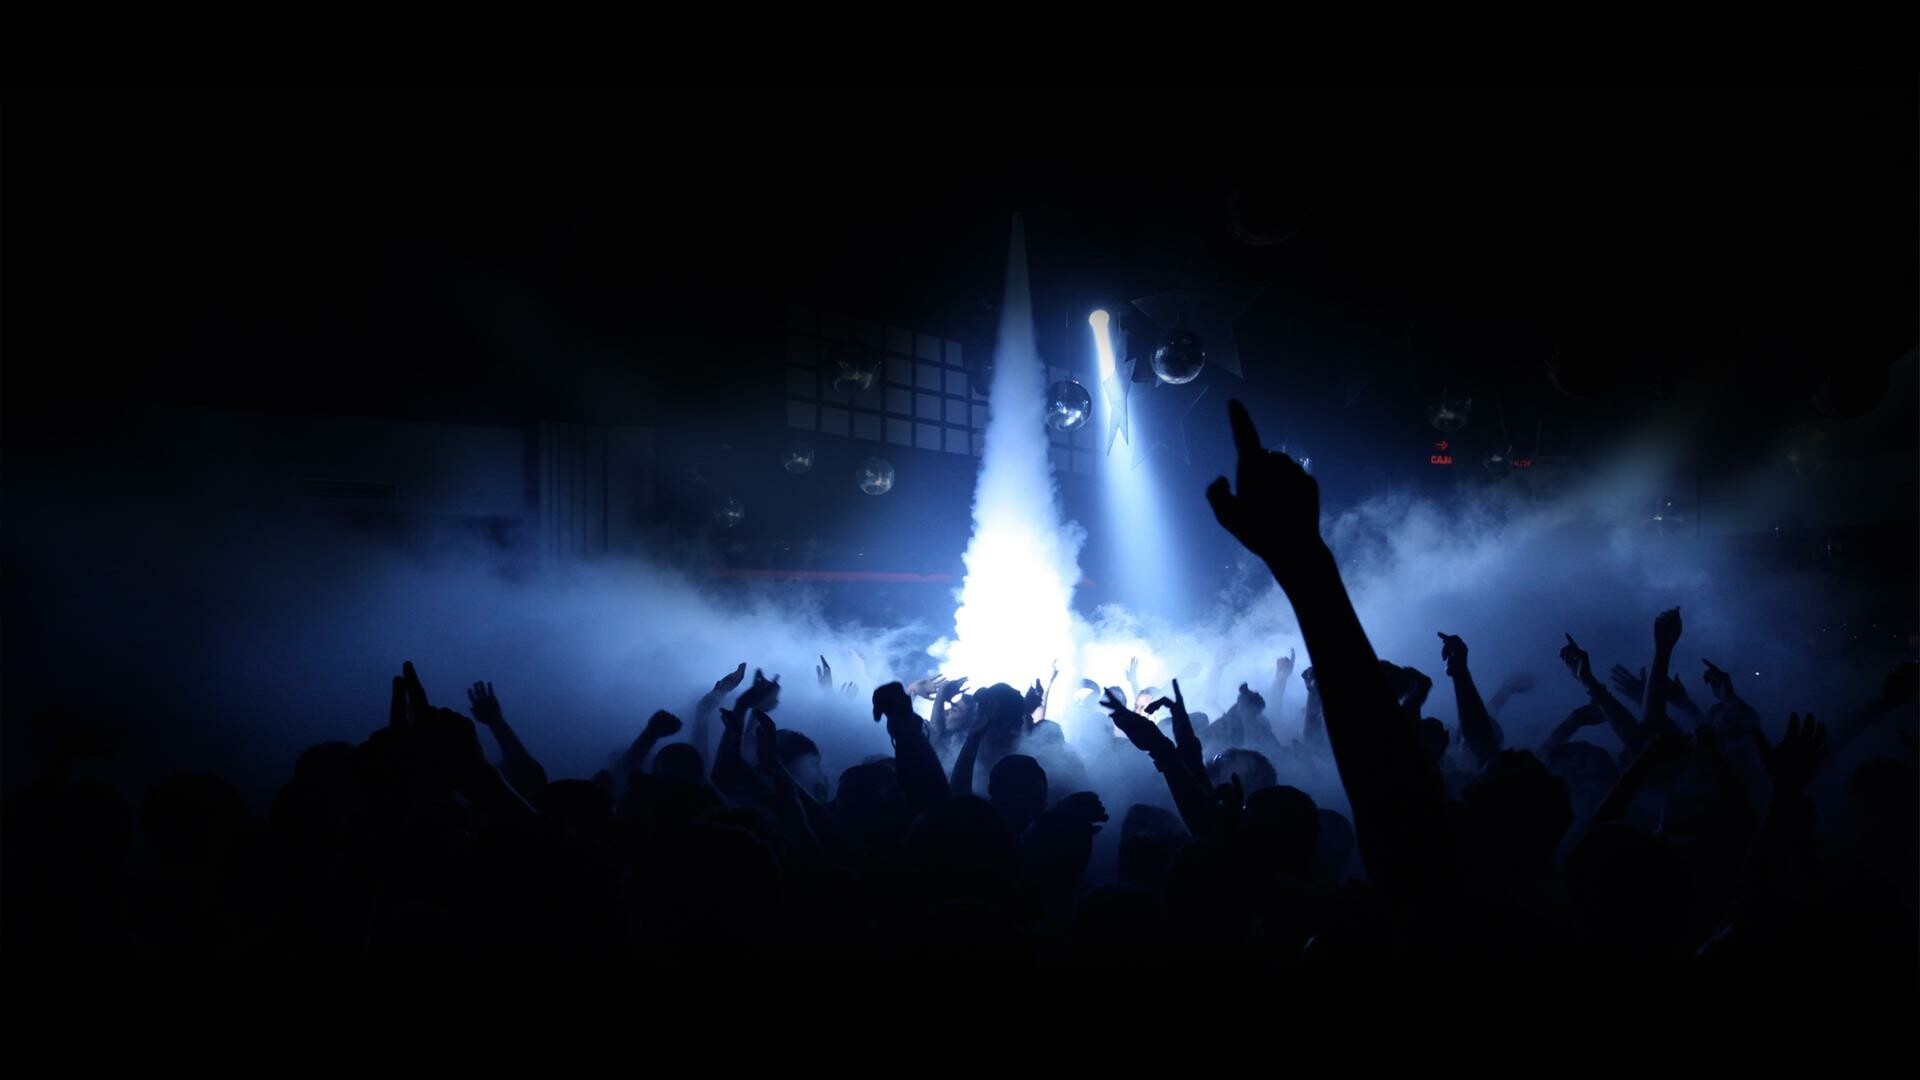 Party: Rave, Crowd, Music, Dancing, Darkness. 1920x1080 Full HD Background.